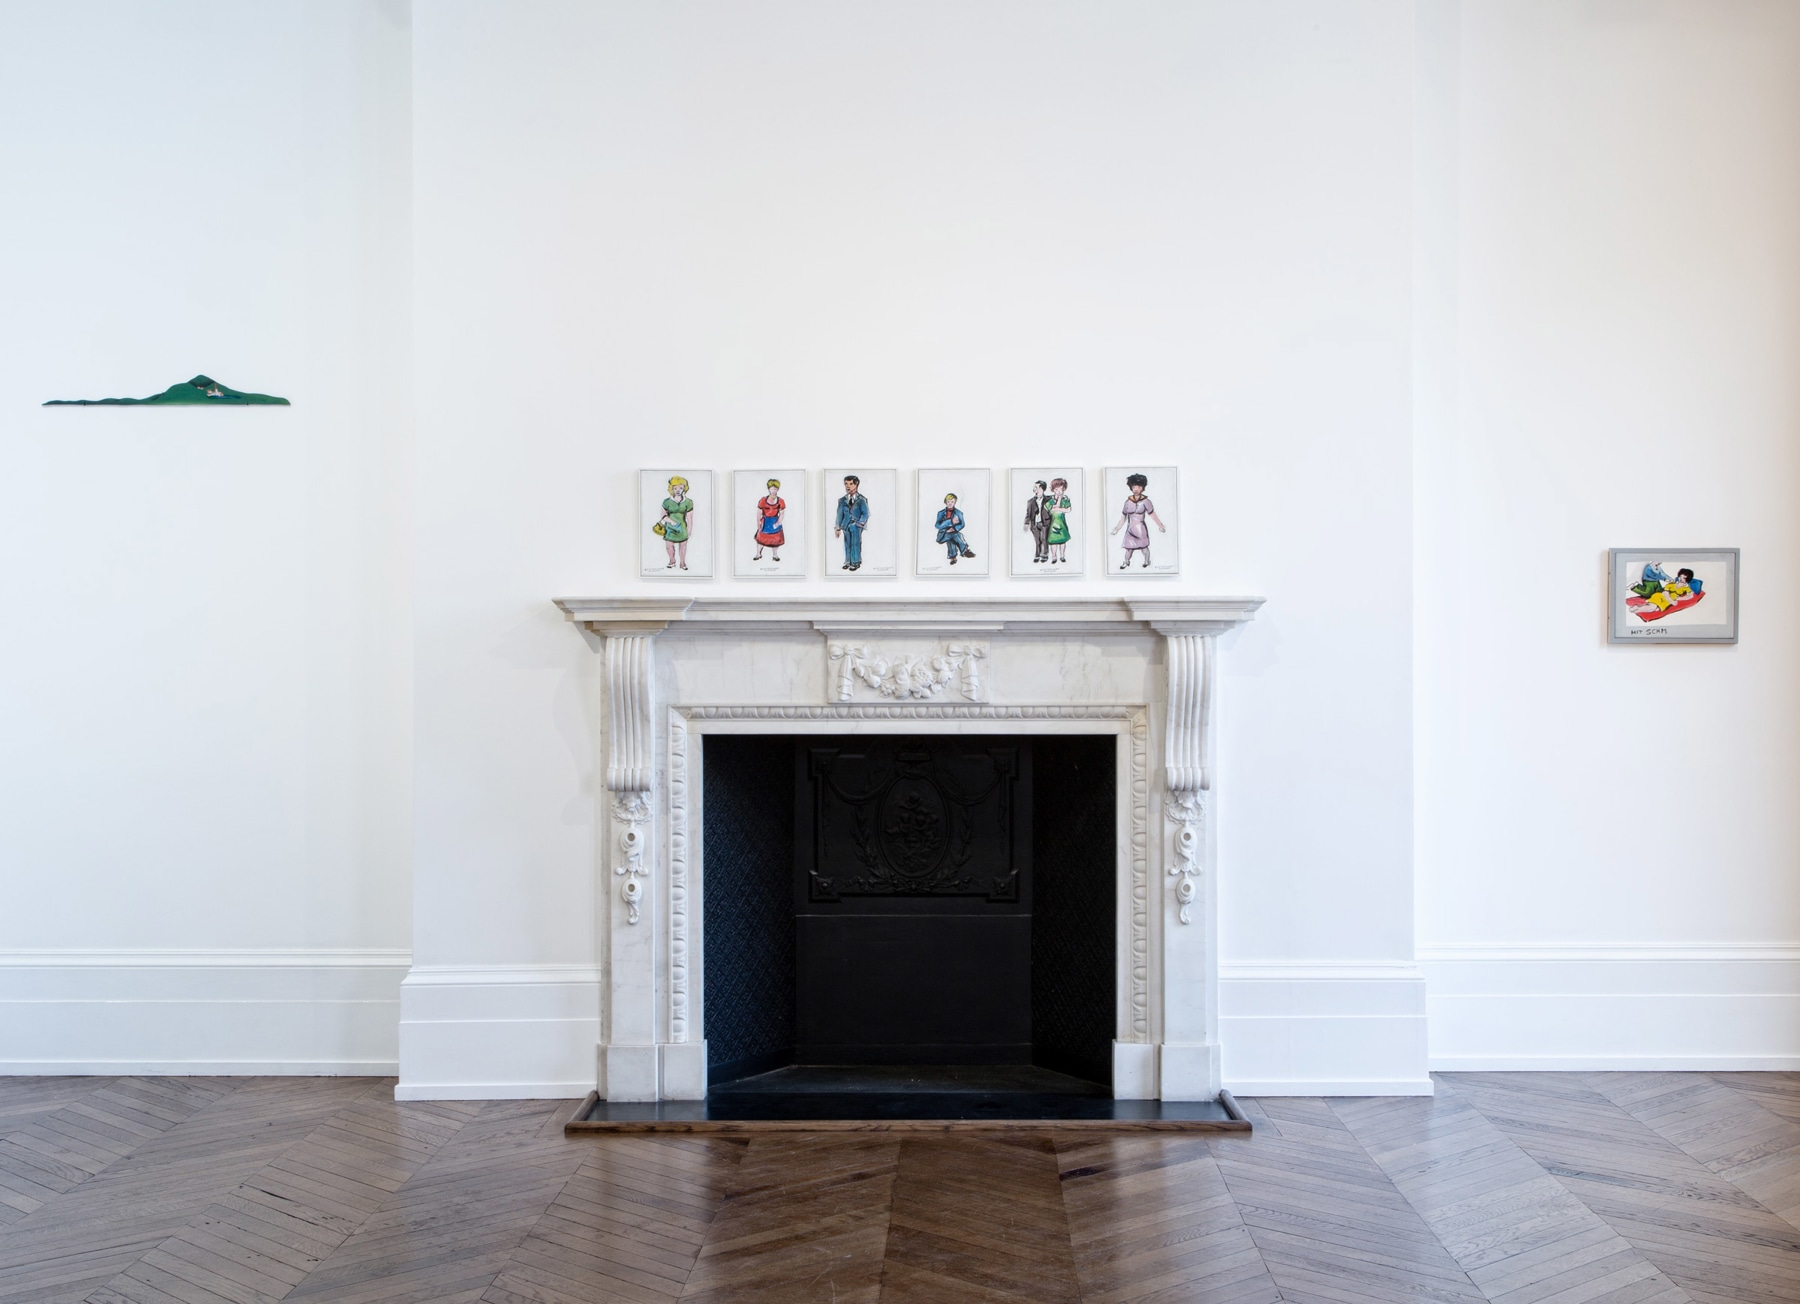 J&Ouml;RG IMMENDORFF LIDL Works and Performances from the 60s and Late Paintings after Hogarth 12 May through 2 July 2016 MAYFAIR, LONDON, Installation View 9